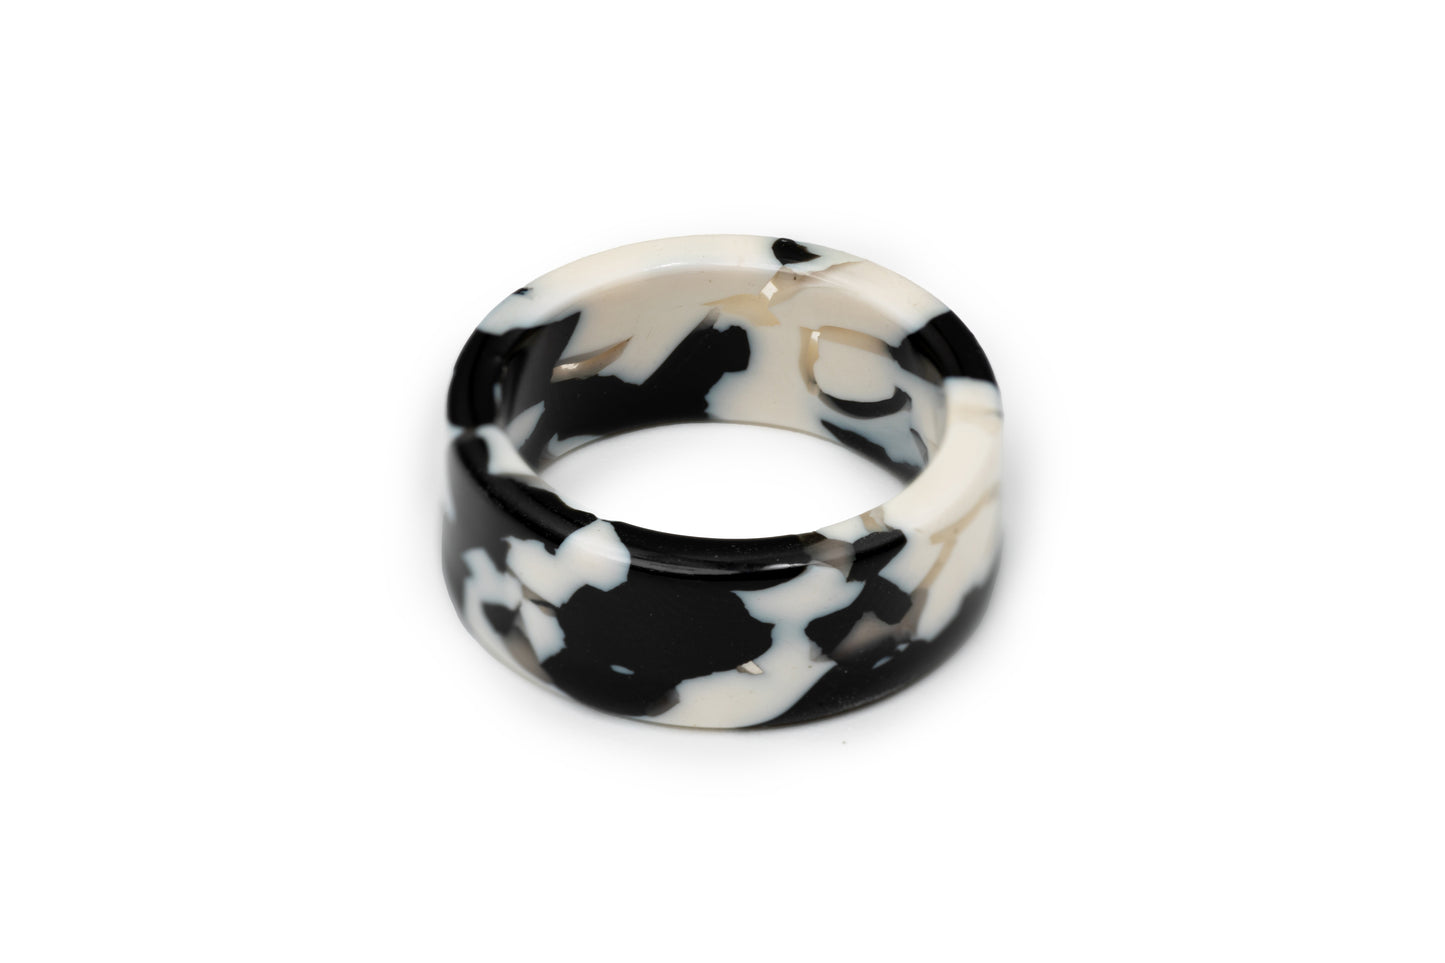 Marbled and Pearl Rings Pack